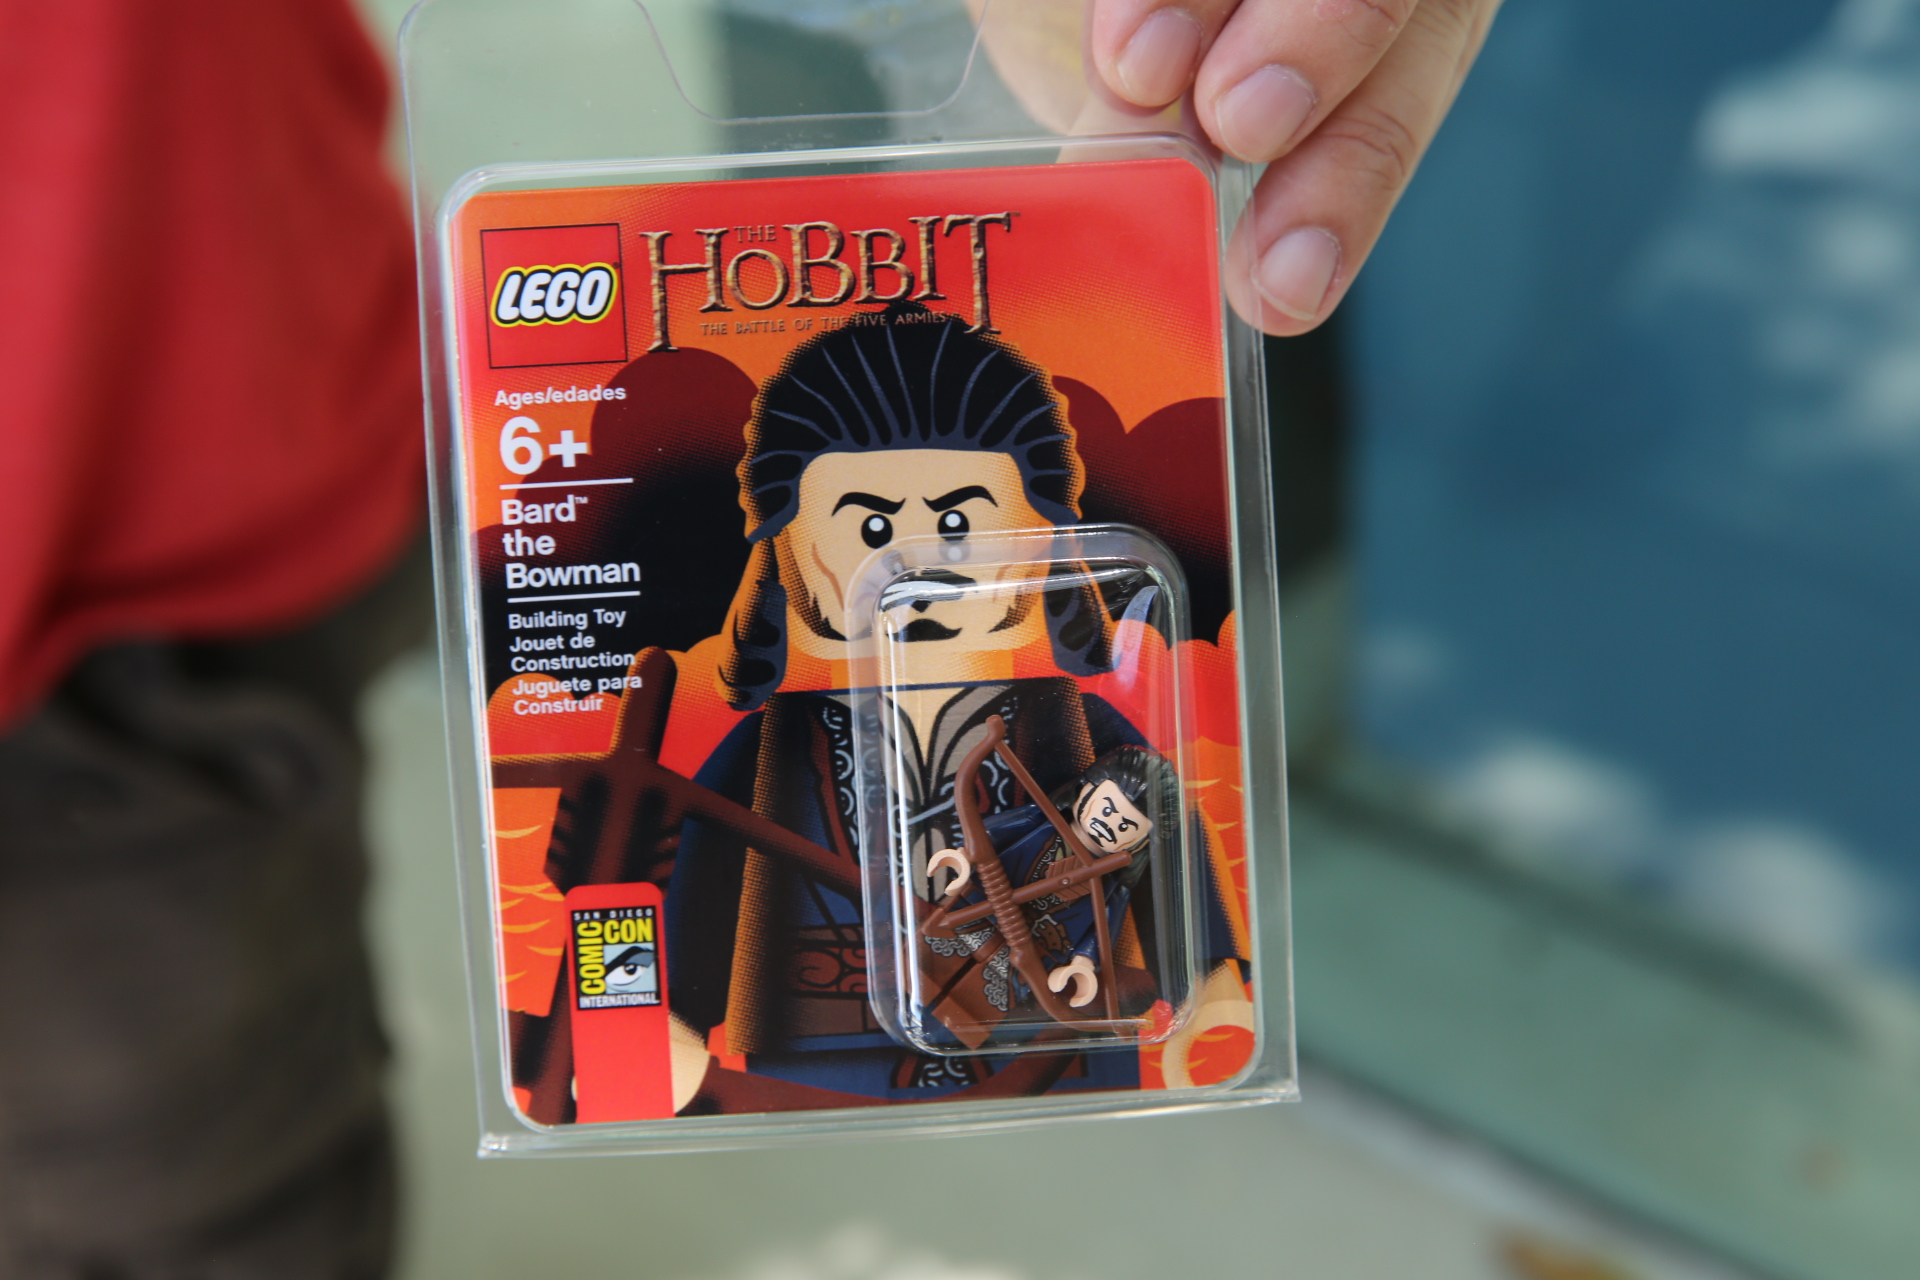 SDCC] Bard the Bowman, LEGO's Not-So-Exclusive Minifigure - FBTB